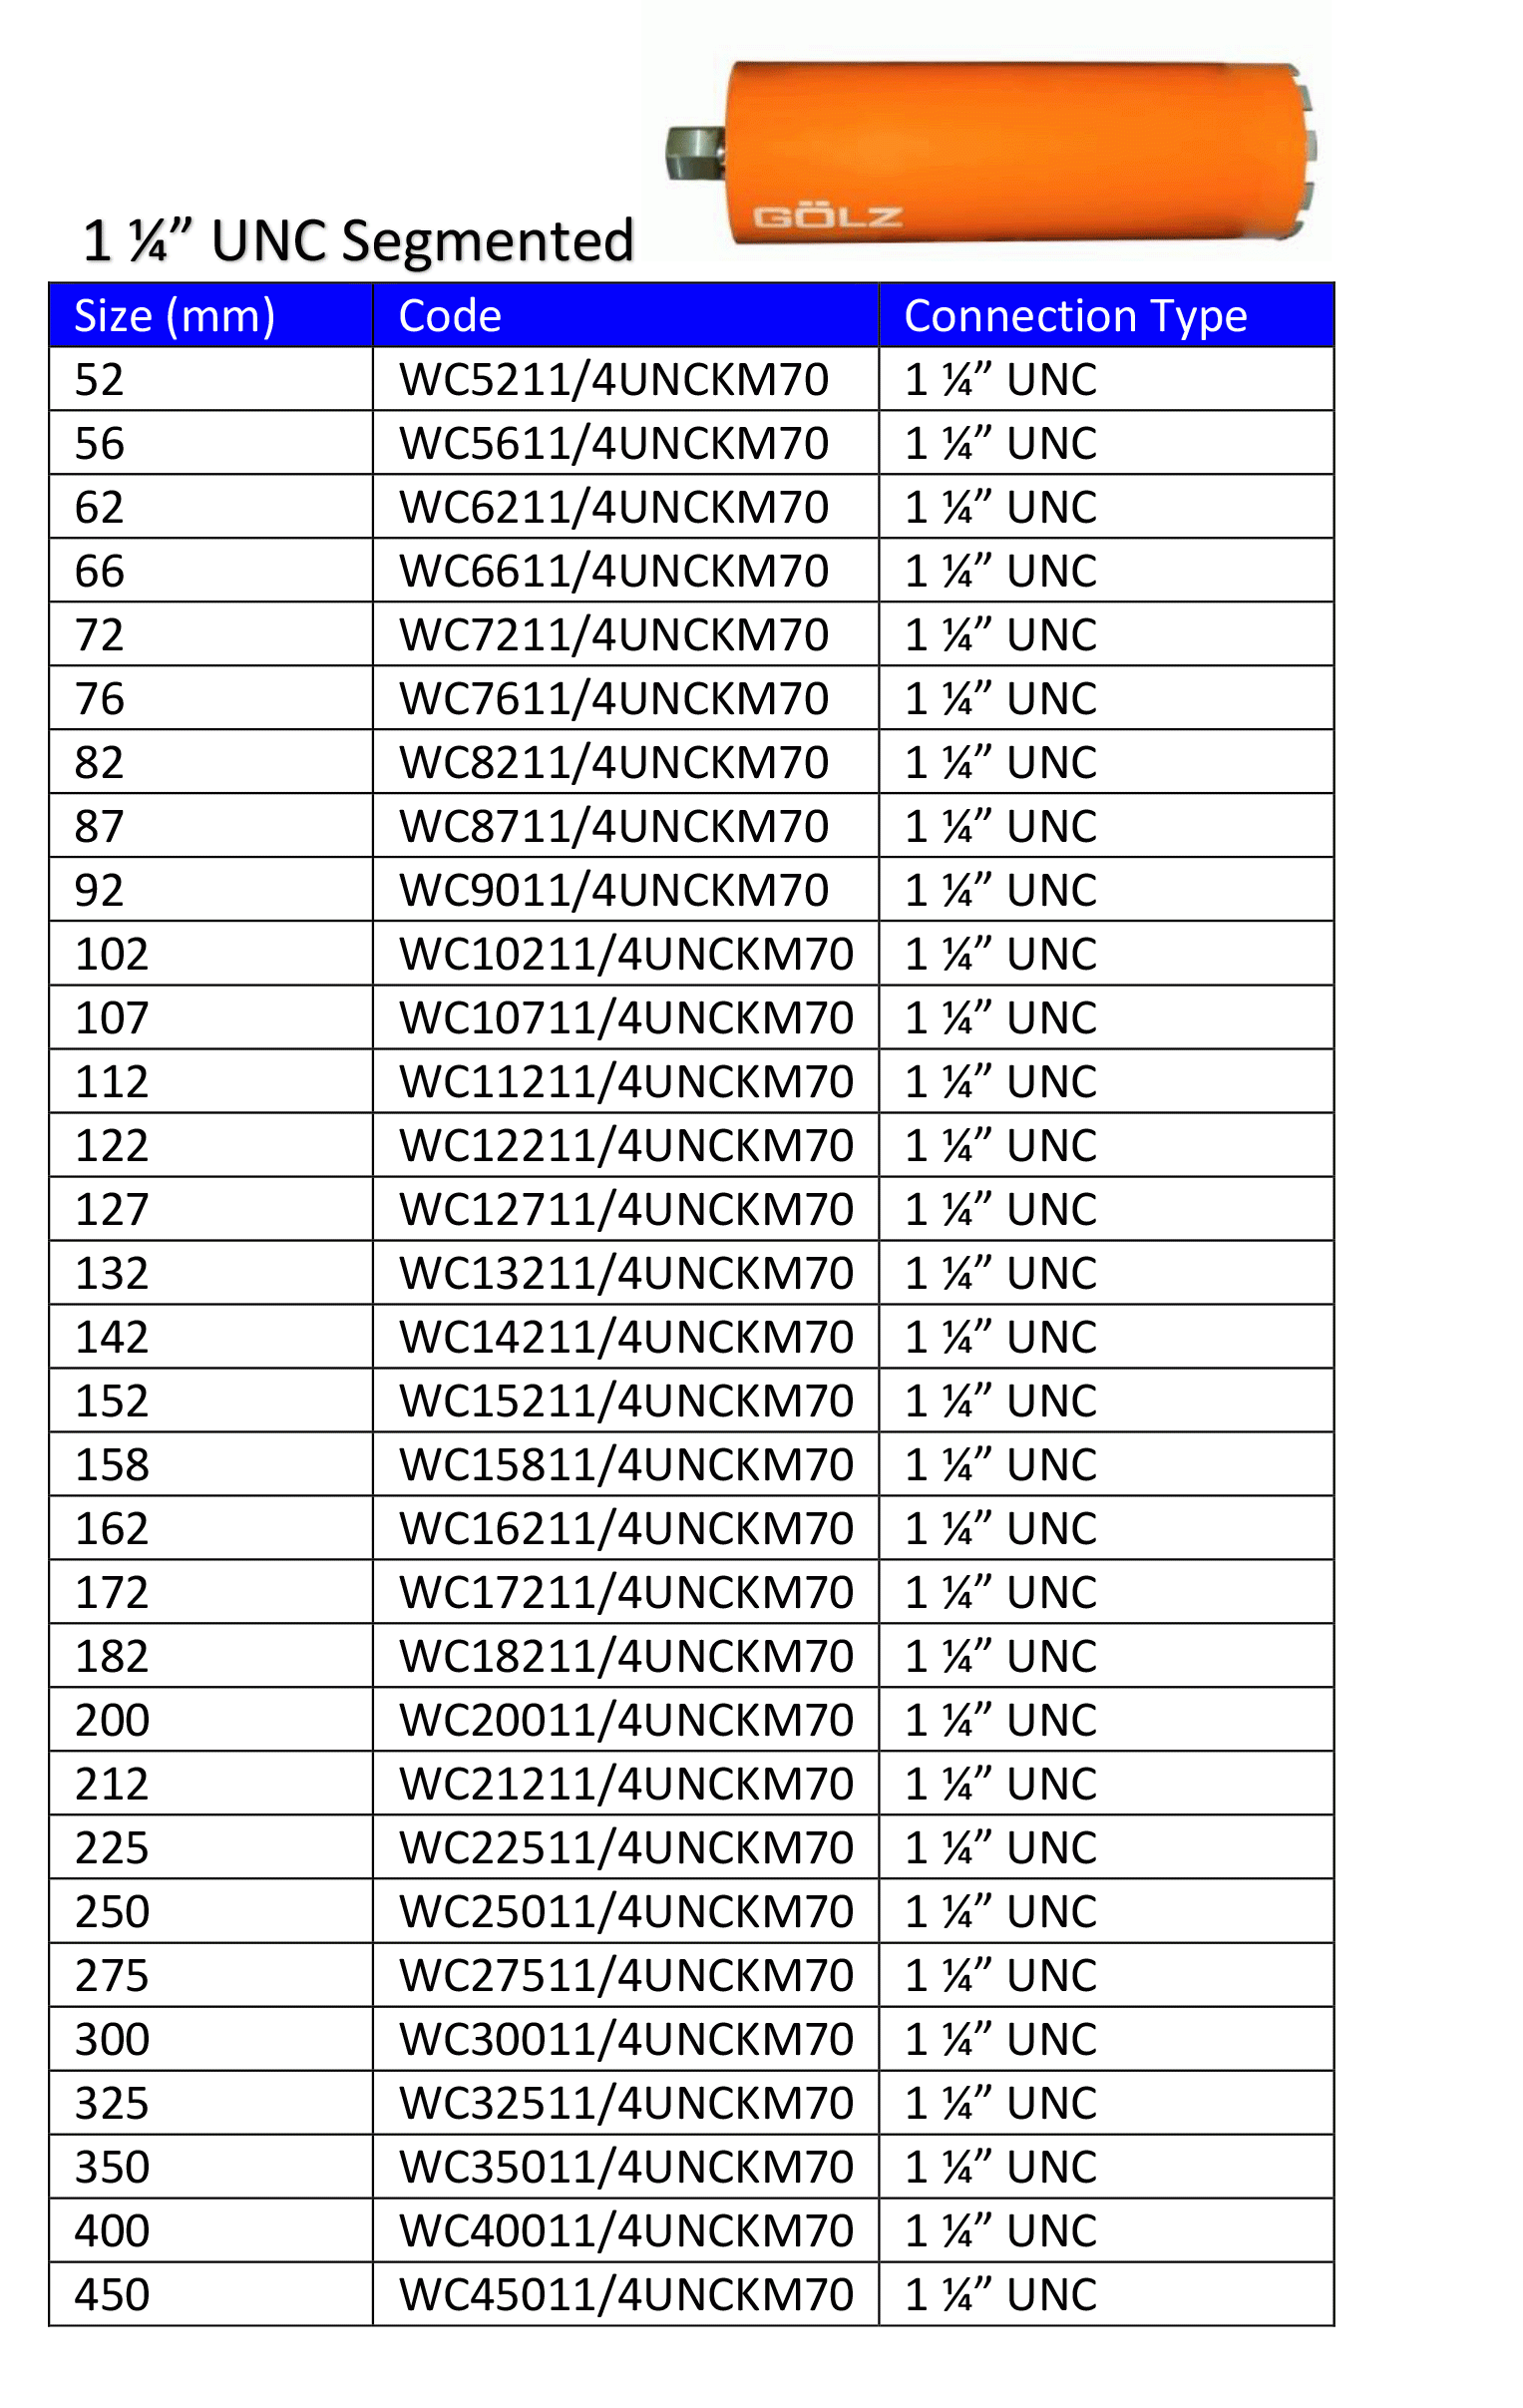 Wet-Cores-info-with-tables-to-upload-2.g